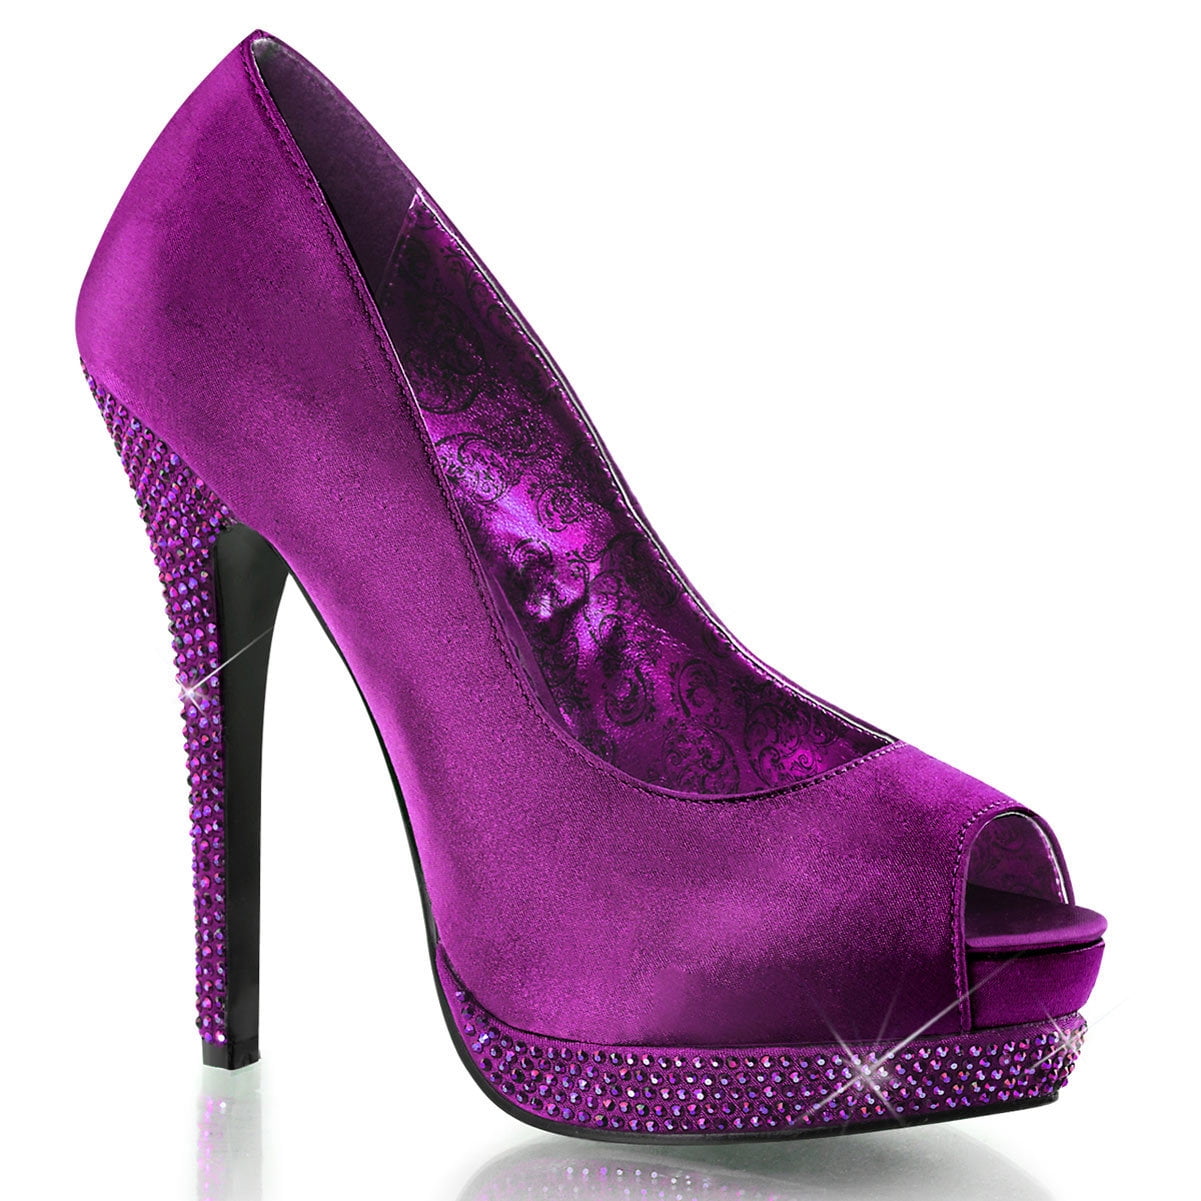 SummitFashions - Womens Rich Purple Satin Pumps Shoes with Purple ...